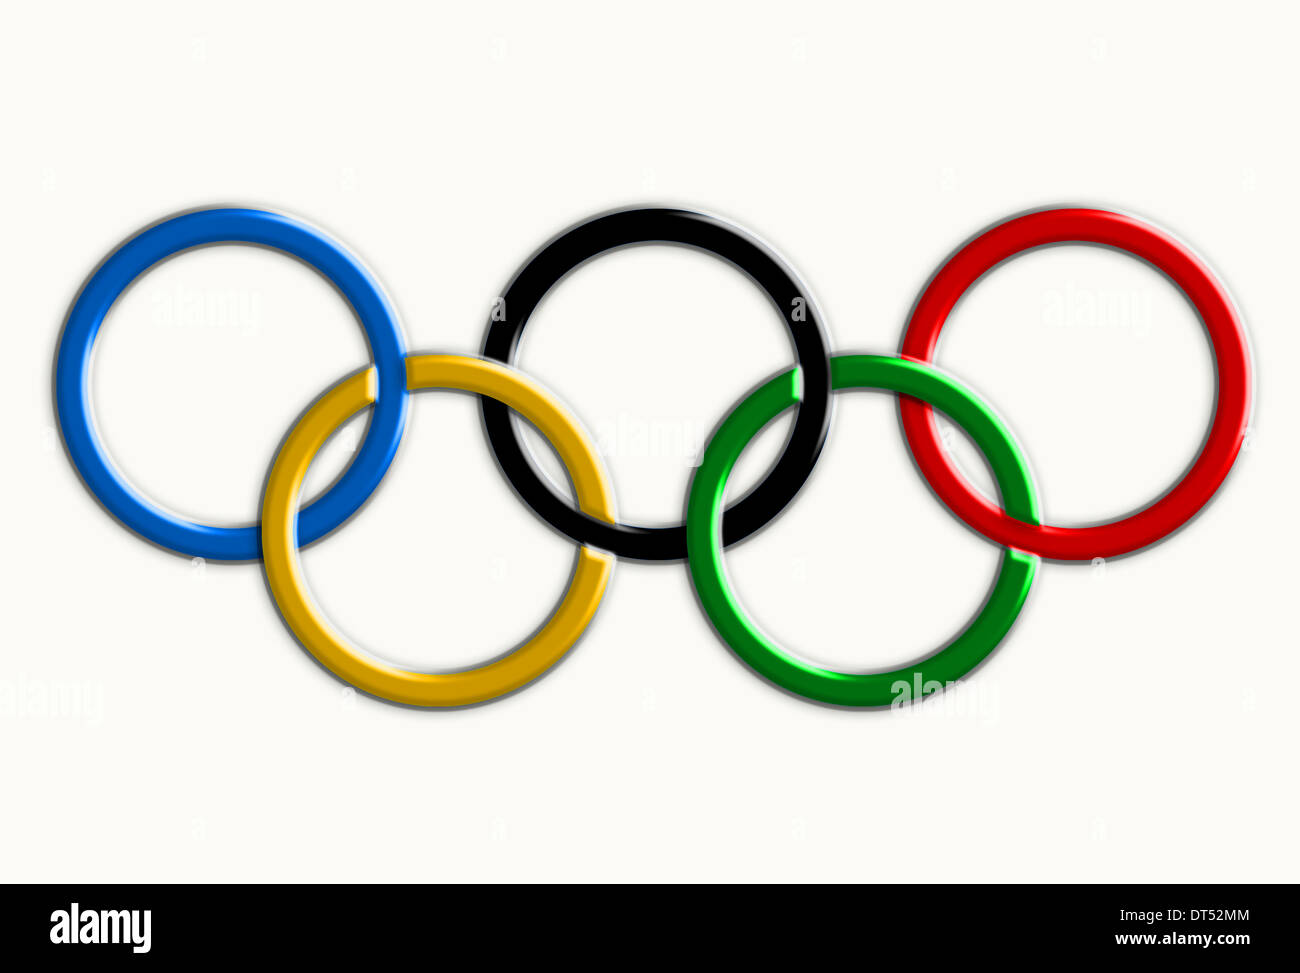 Olympic games rings symbol. Isolated on a white background Stock Photo